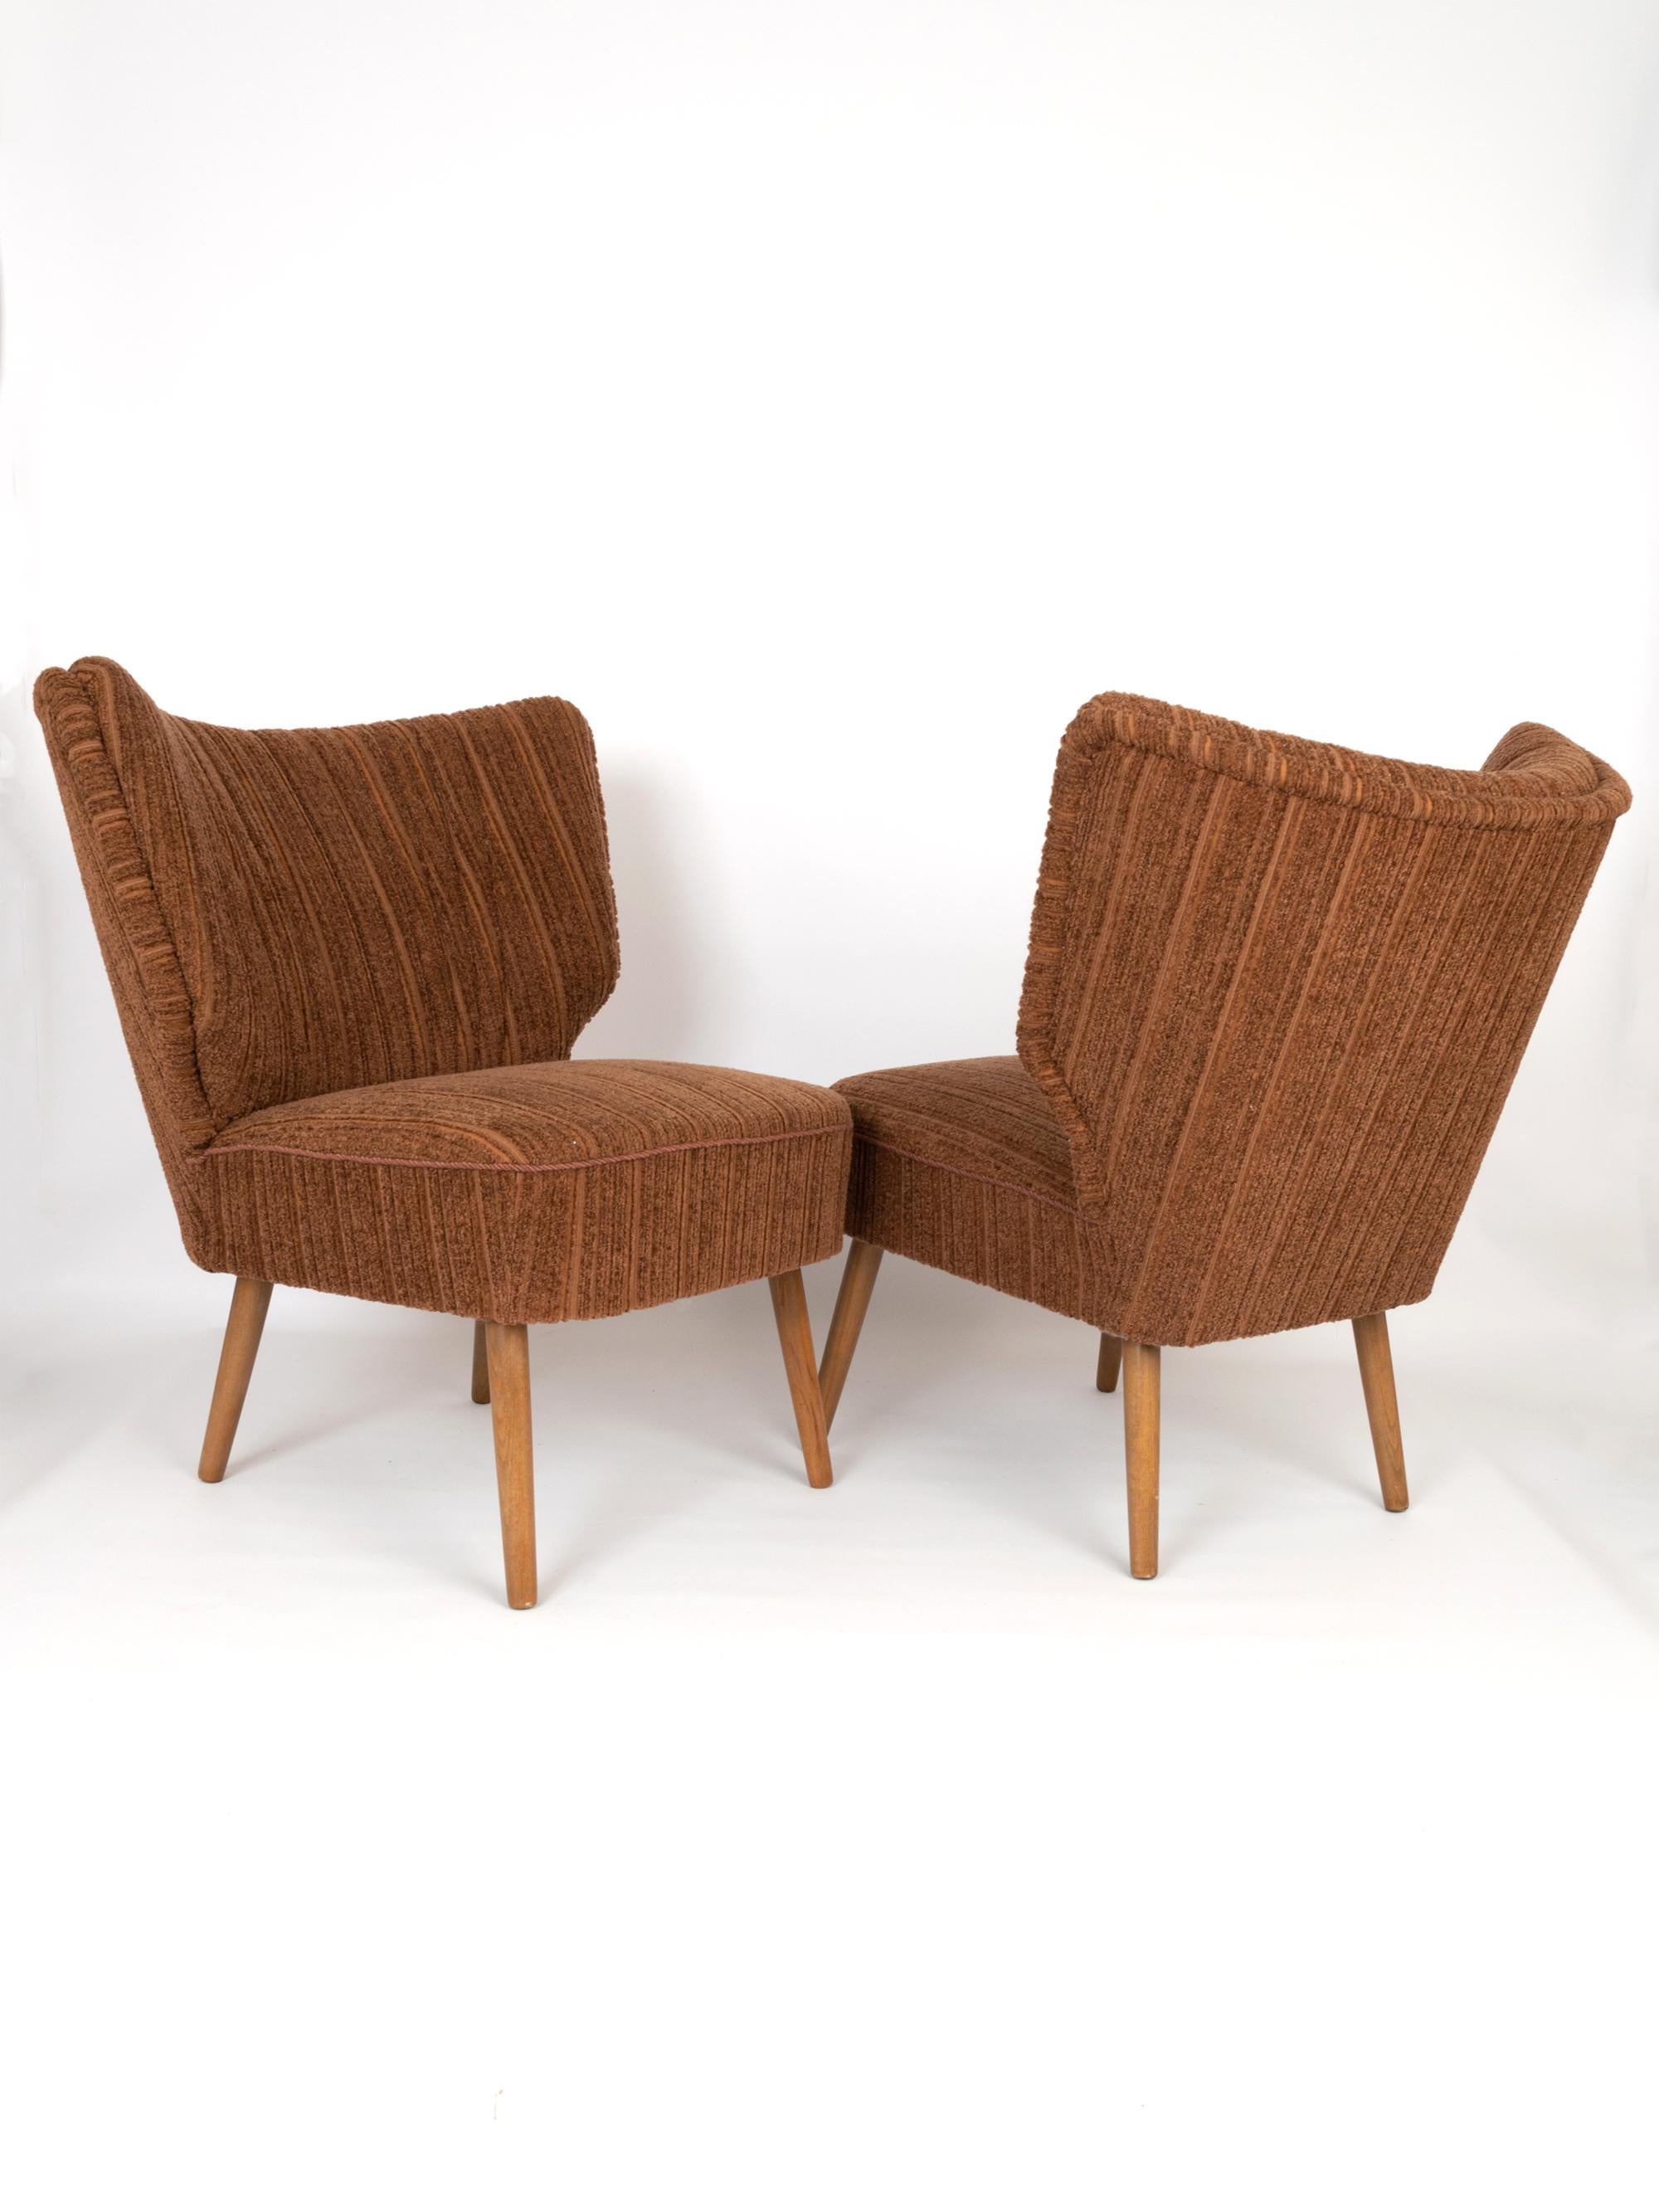 Pair of Danish Cocktail Lounge Chairs, C.1950 For Sale 3